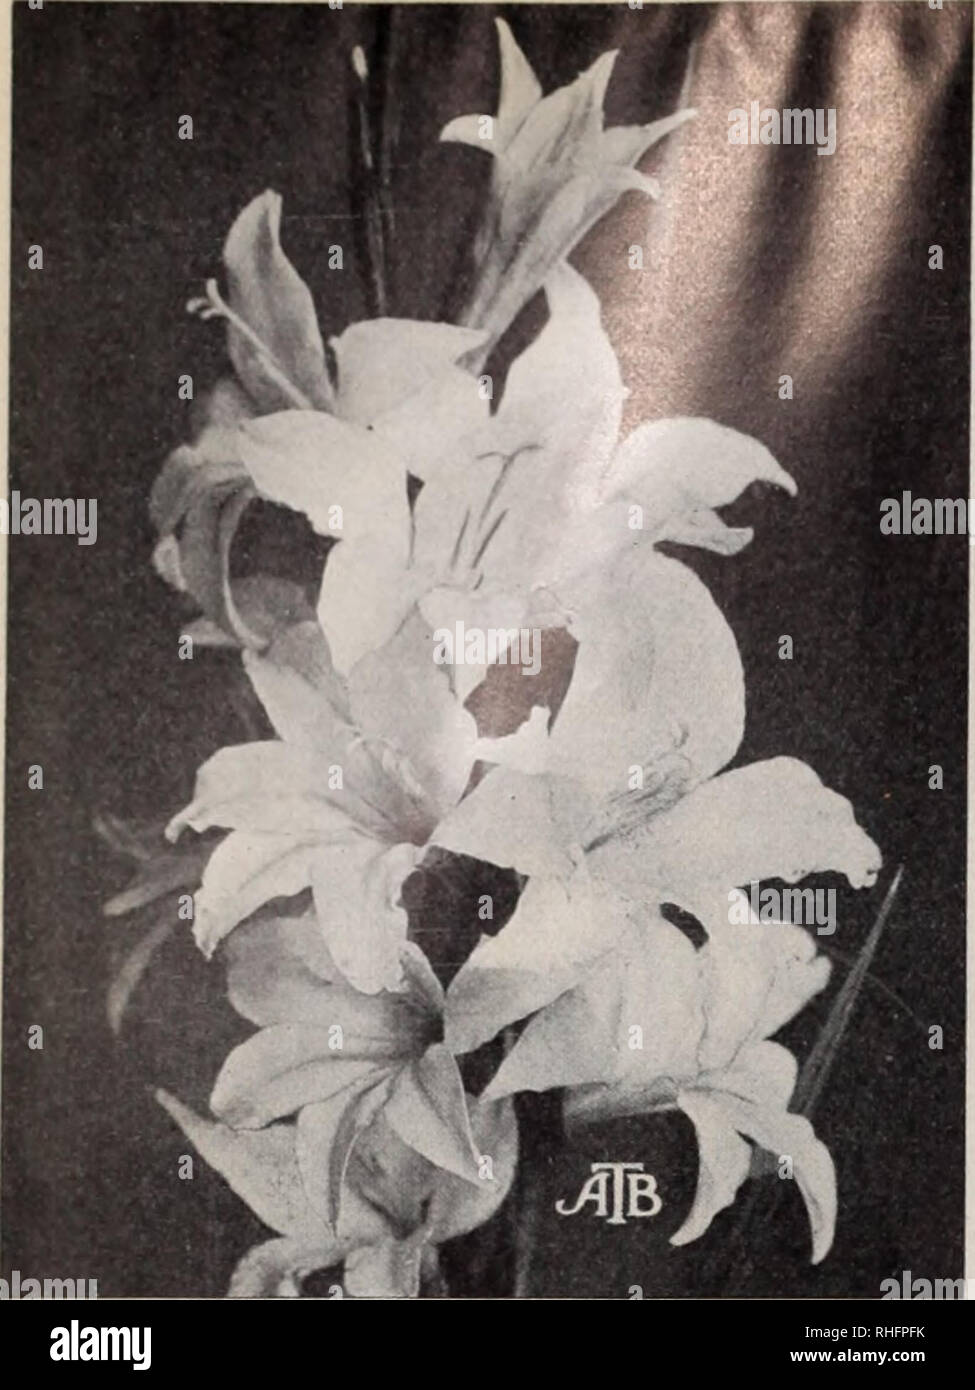 . Boddington's quality bulbs, seeds and plants / Arthur T. Boddington.. Nursery Catalogue. 20 Arthvir T. Boddington, 342 West 14th St.. New York City. Gladiolus Colvillei (type) Ackermanii. New. Salmon-orange, with white handsome. 25c. per doz., $1.50 per 100, $12 per 1,000. Qaeen Wilbelmina. Blush-white, with conspicuous blotches of cream, with scarlet margin. 50 cts. per doz., $3 per 100, $28 per 1,000. Sappho. Large; white, shaded pale hlac, with faint, creamy blotches, edged violet. 20 cts. per doz.. Si.50 per 100, $12 per 1,000. Gladiolus Gandavensis Hybrids Many gardeners plant these in  Stock Photo